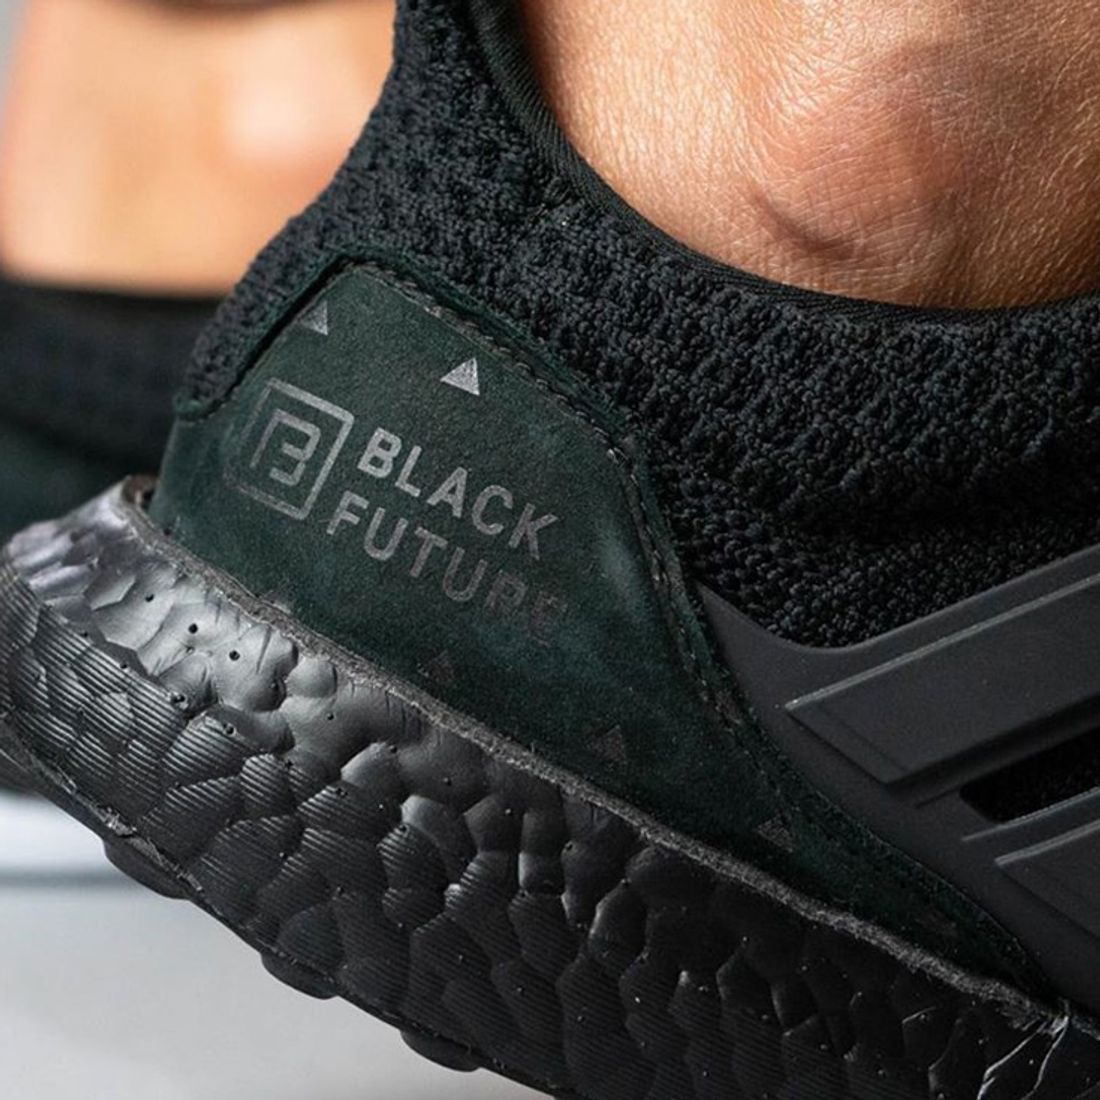 Mysterious UltraBOOST 'Black Future'... what the??? - Freaker